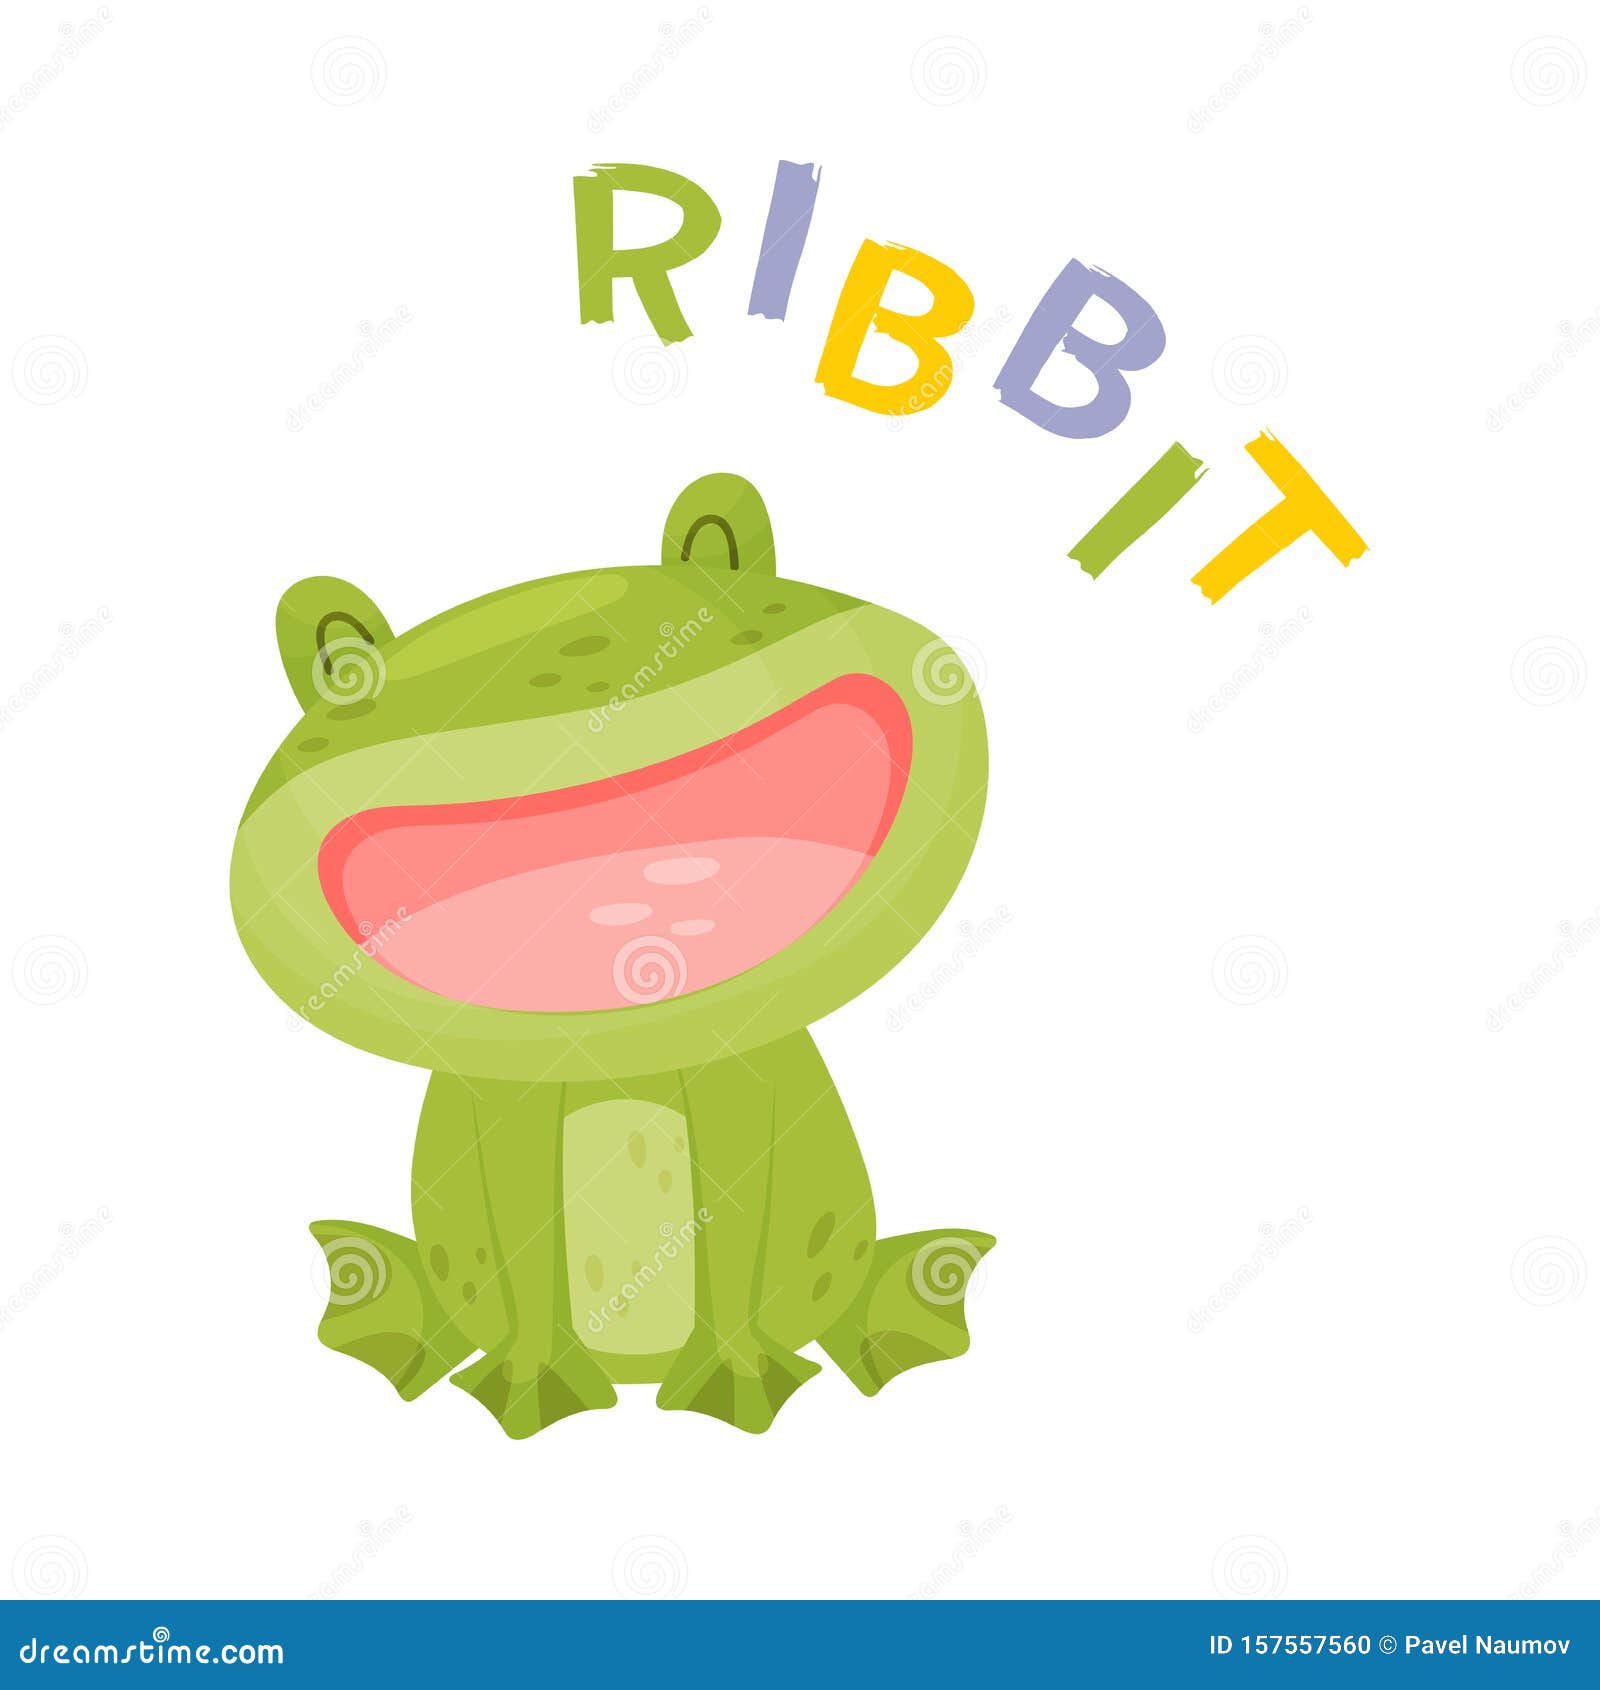 Cartoon Green Frog. Vector Illustration on a White Background